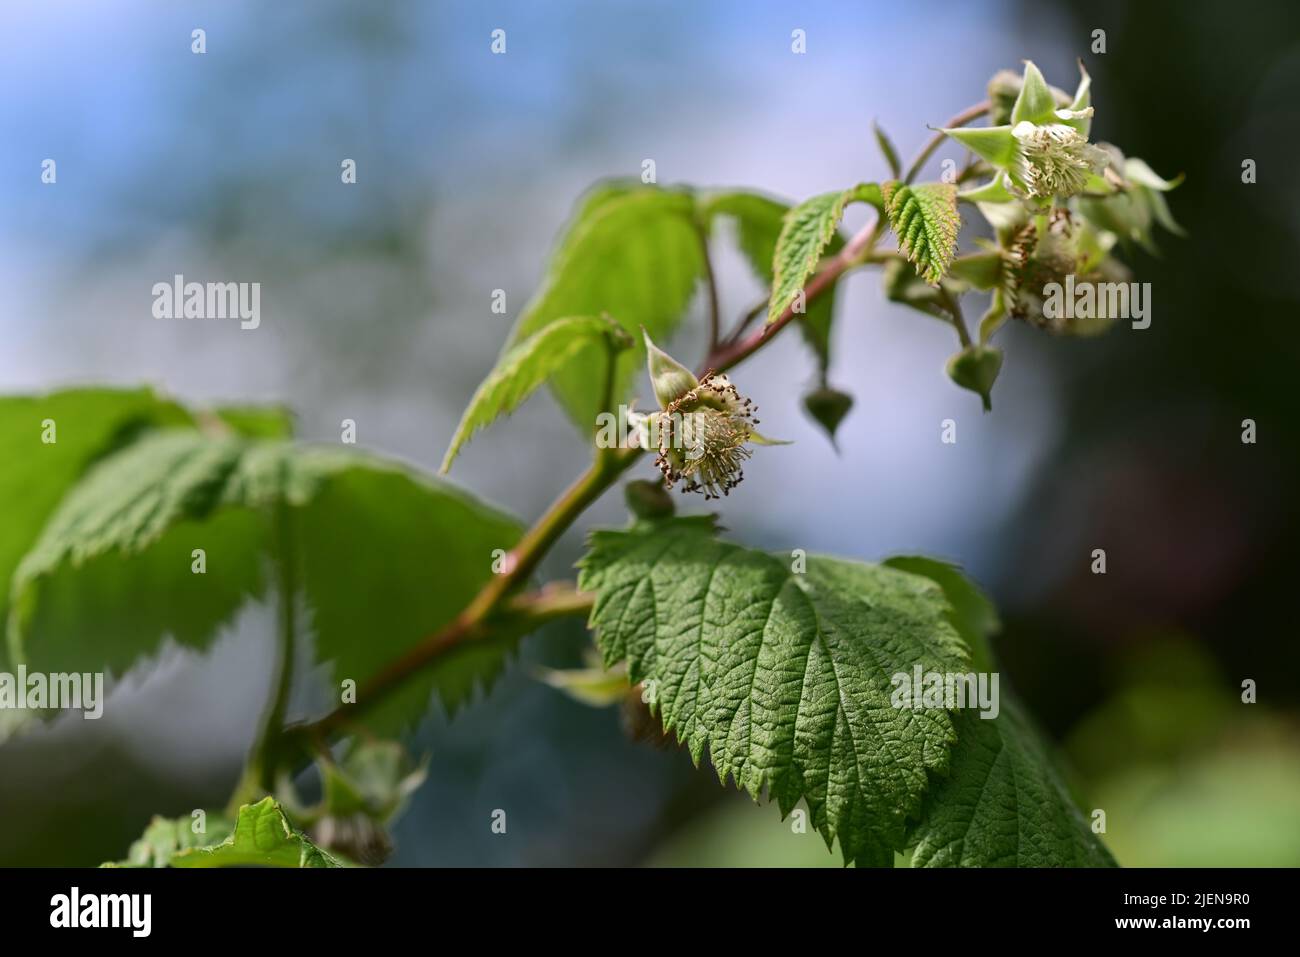 Unripe rashberry on the bush against a bluured background Stock Photo